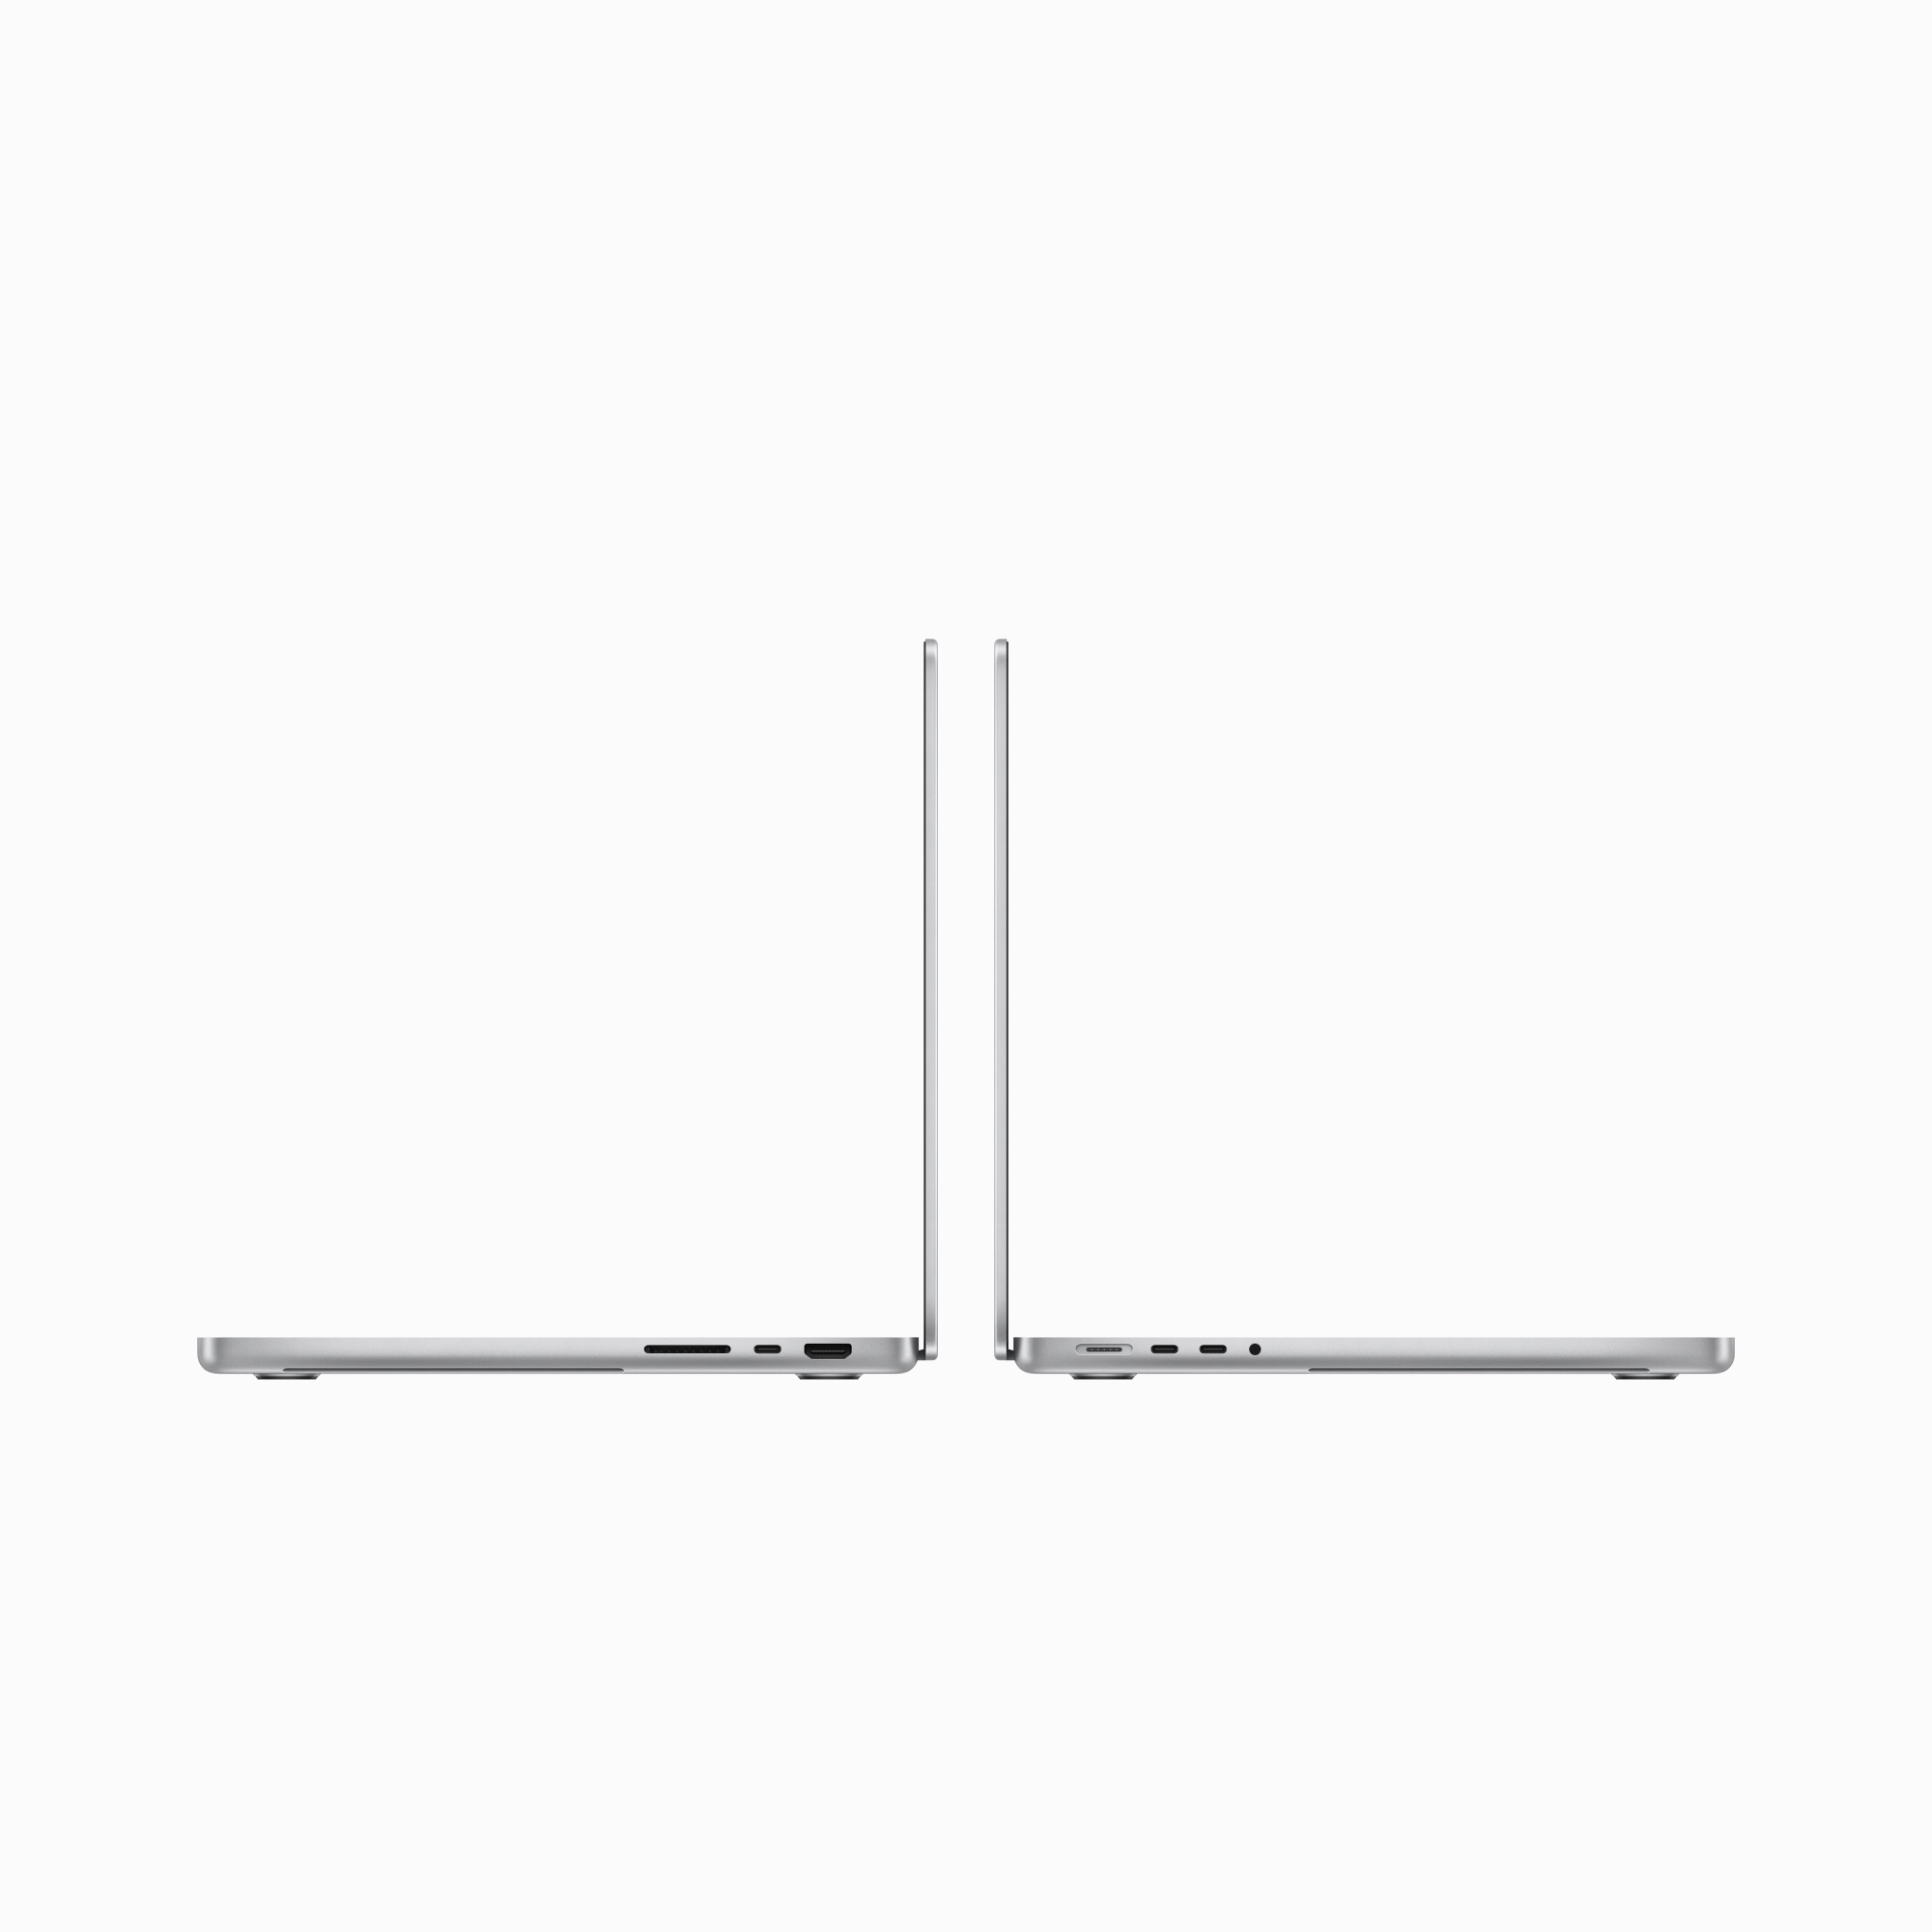 14-inch MacBook Pro: Apple M3 Max chip with 16c CPU and 40c GPU, 1TB SSD - Silver